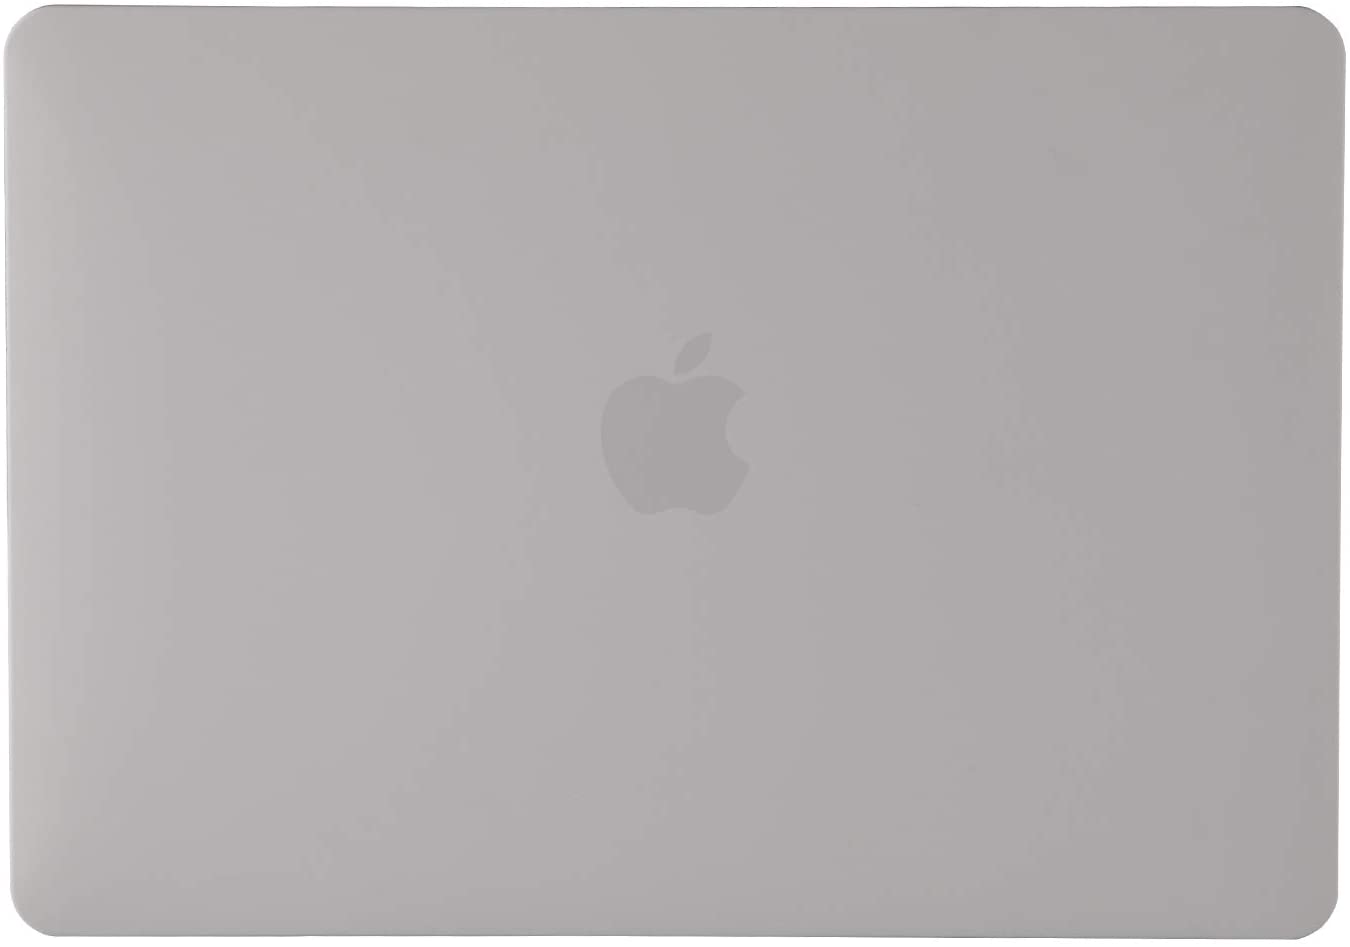 Matte Case Cover for Macbook Air 13 inch M1 A2337 / A2179 Touch ID 2020 (Rock Grey)